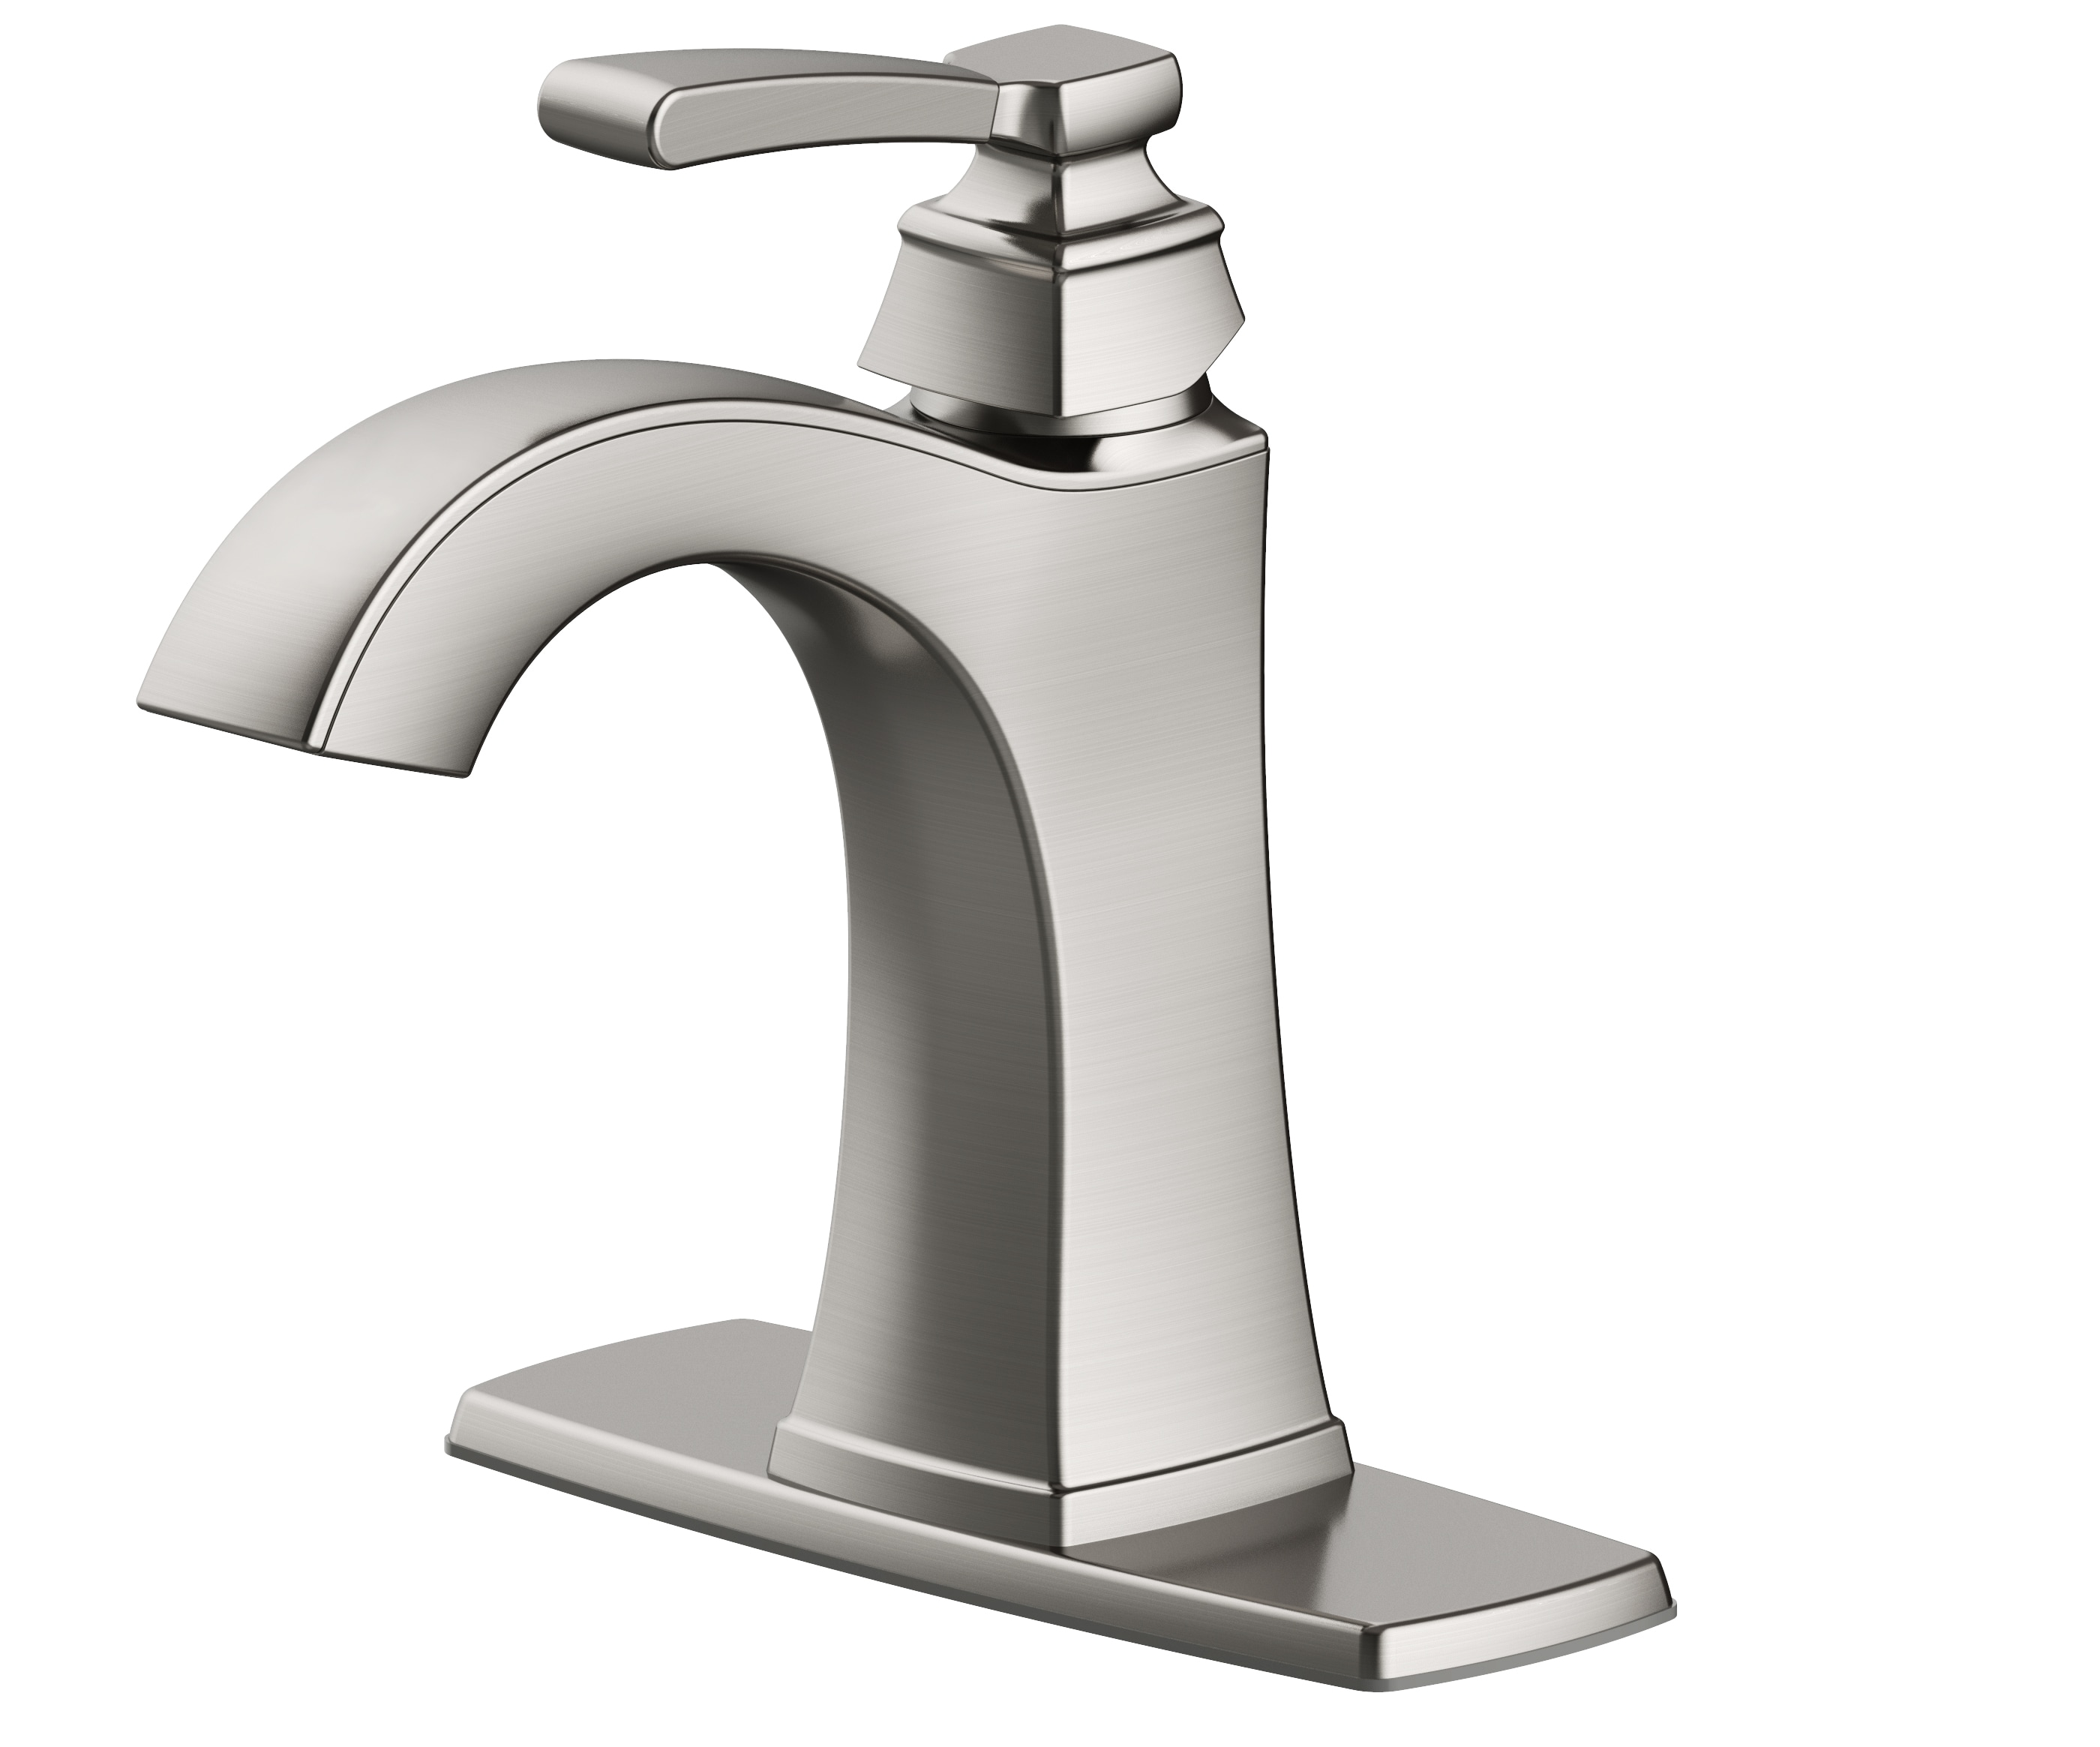 allen + roth Chesler Brushed Nickel Single Hole 1-Handle WaterSense Bathroom Sink Faucet with Drain and Deck Plate